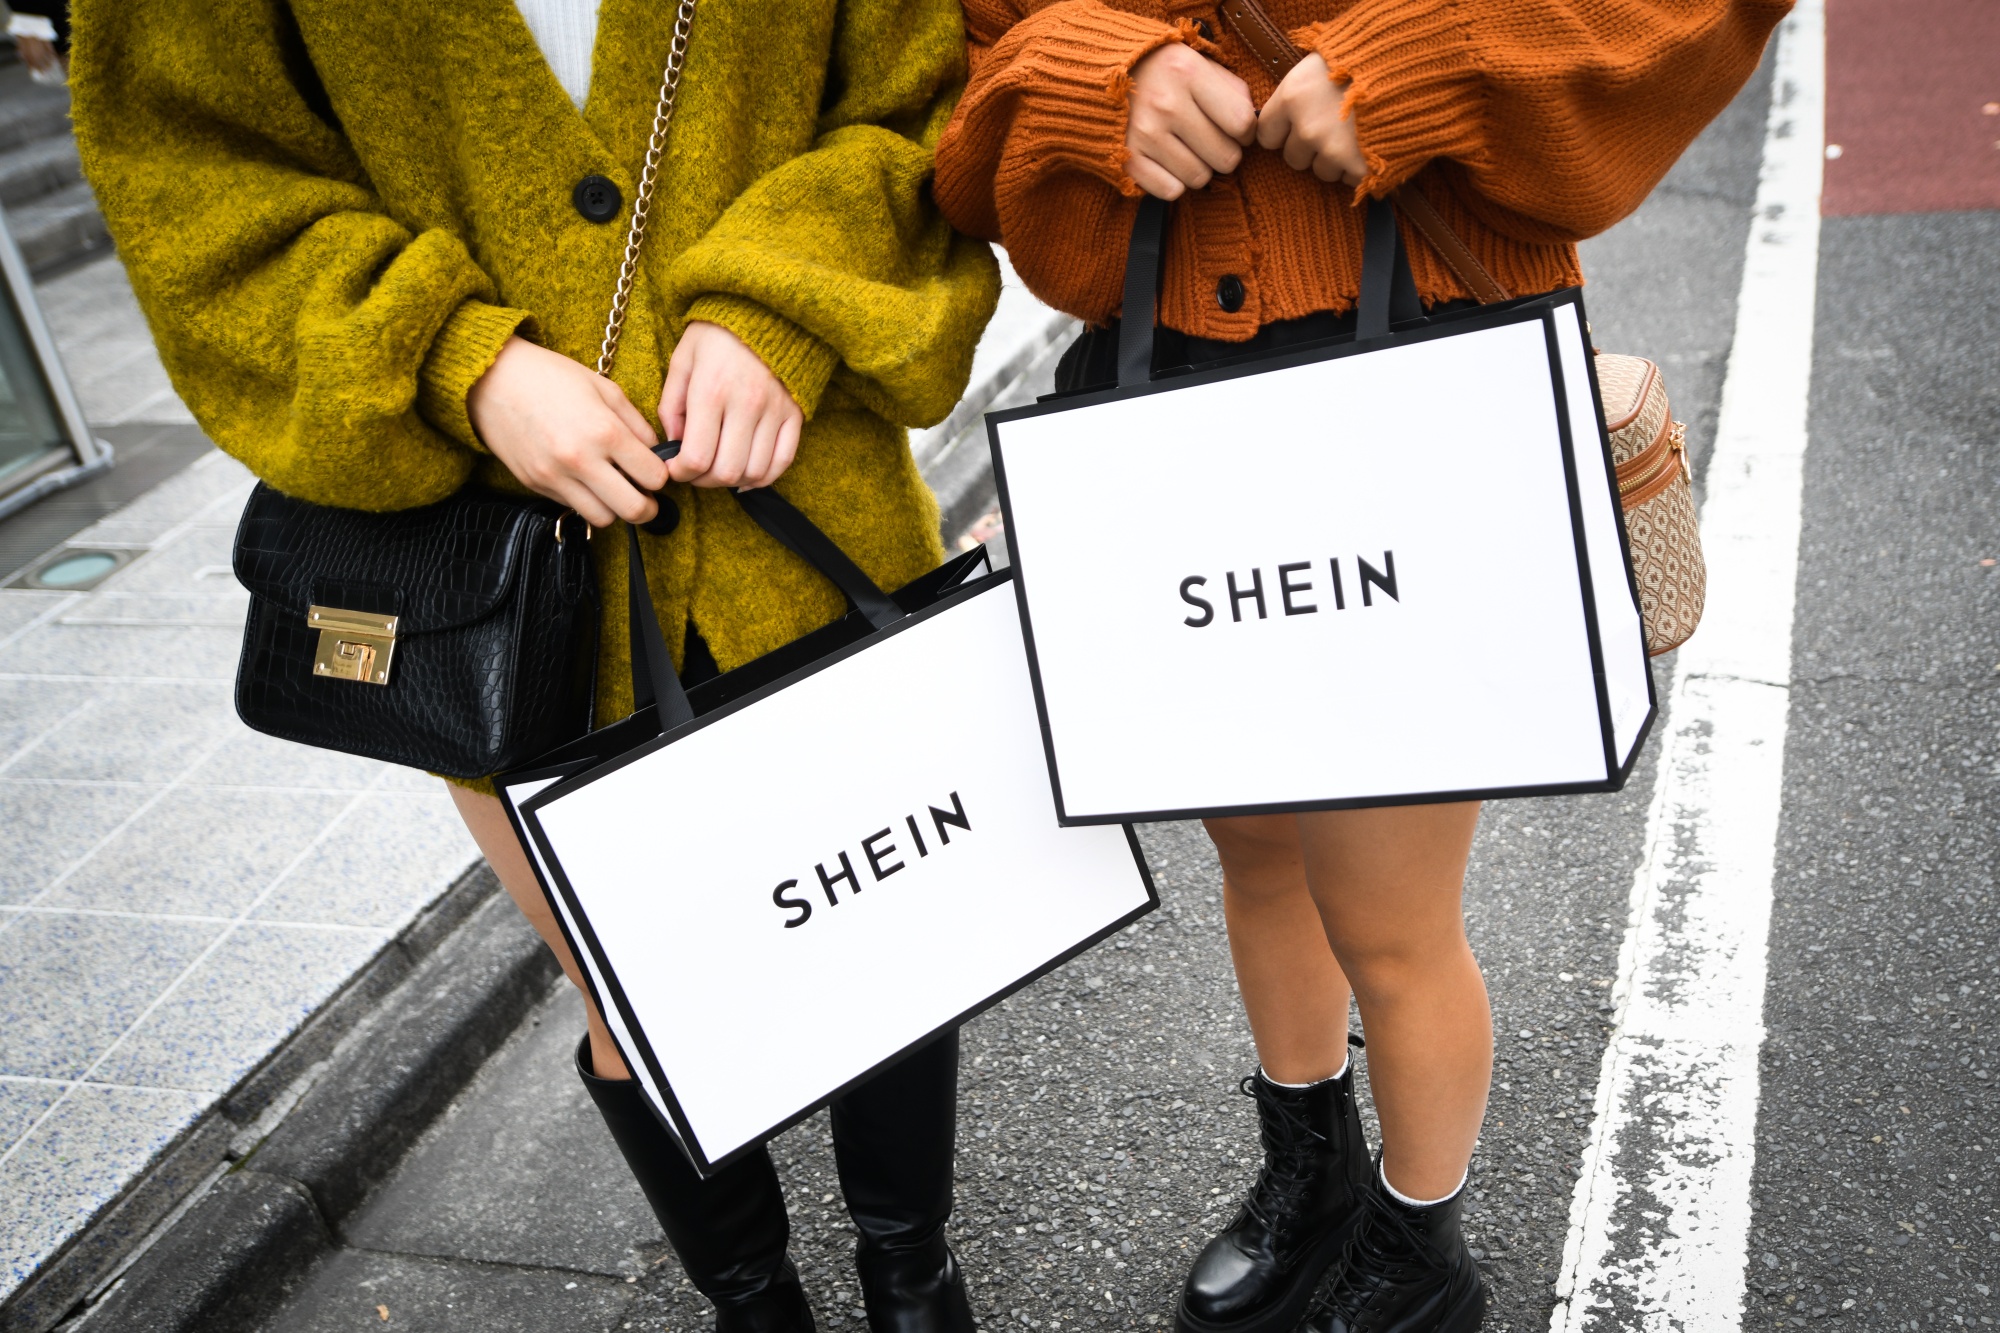 Shein's Lead Under Fire as Chinese-Owned App Tops US Charts